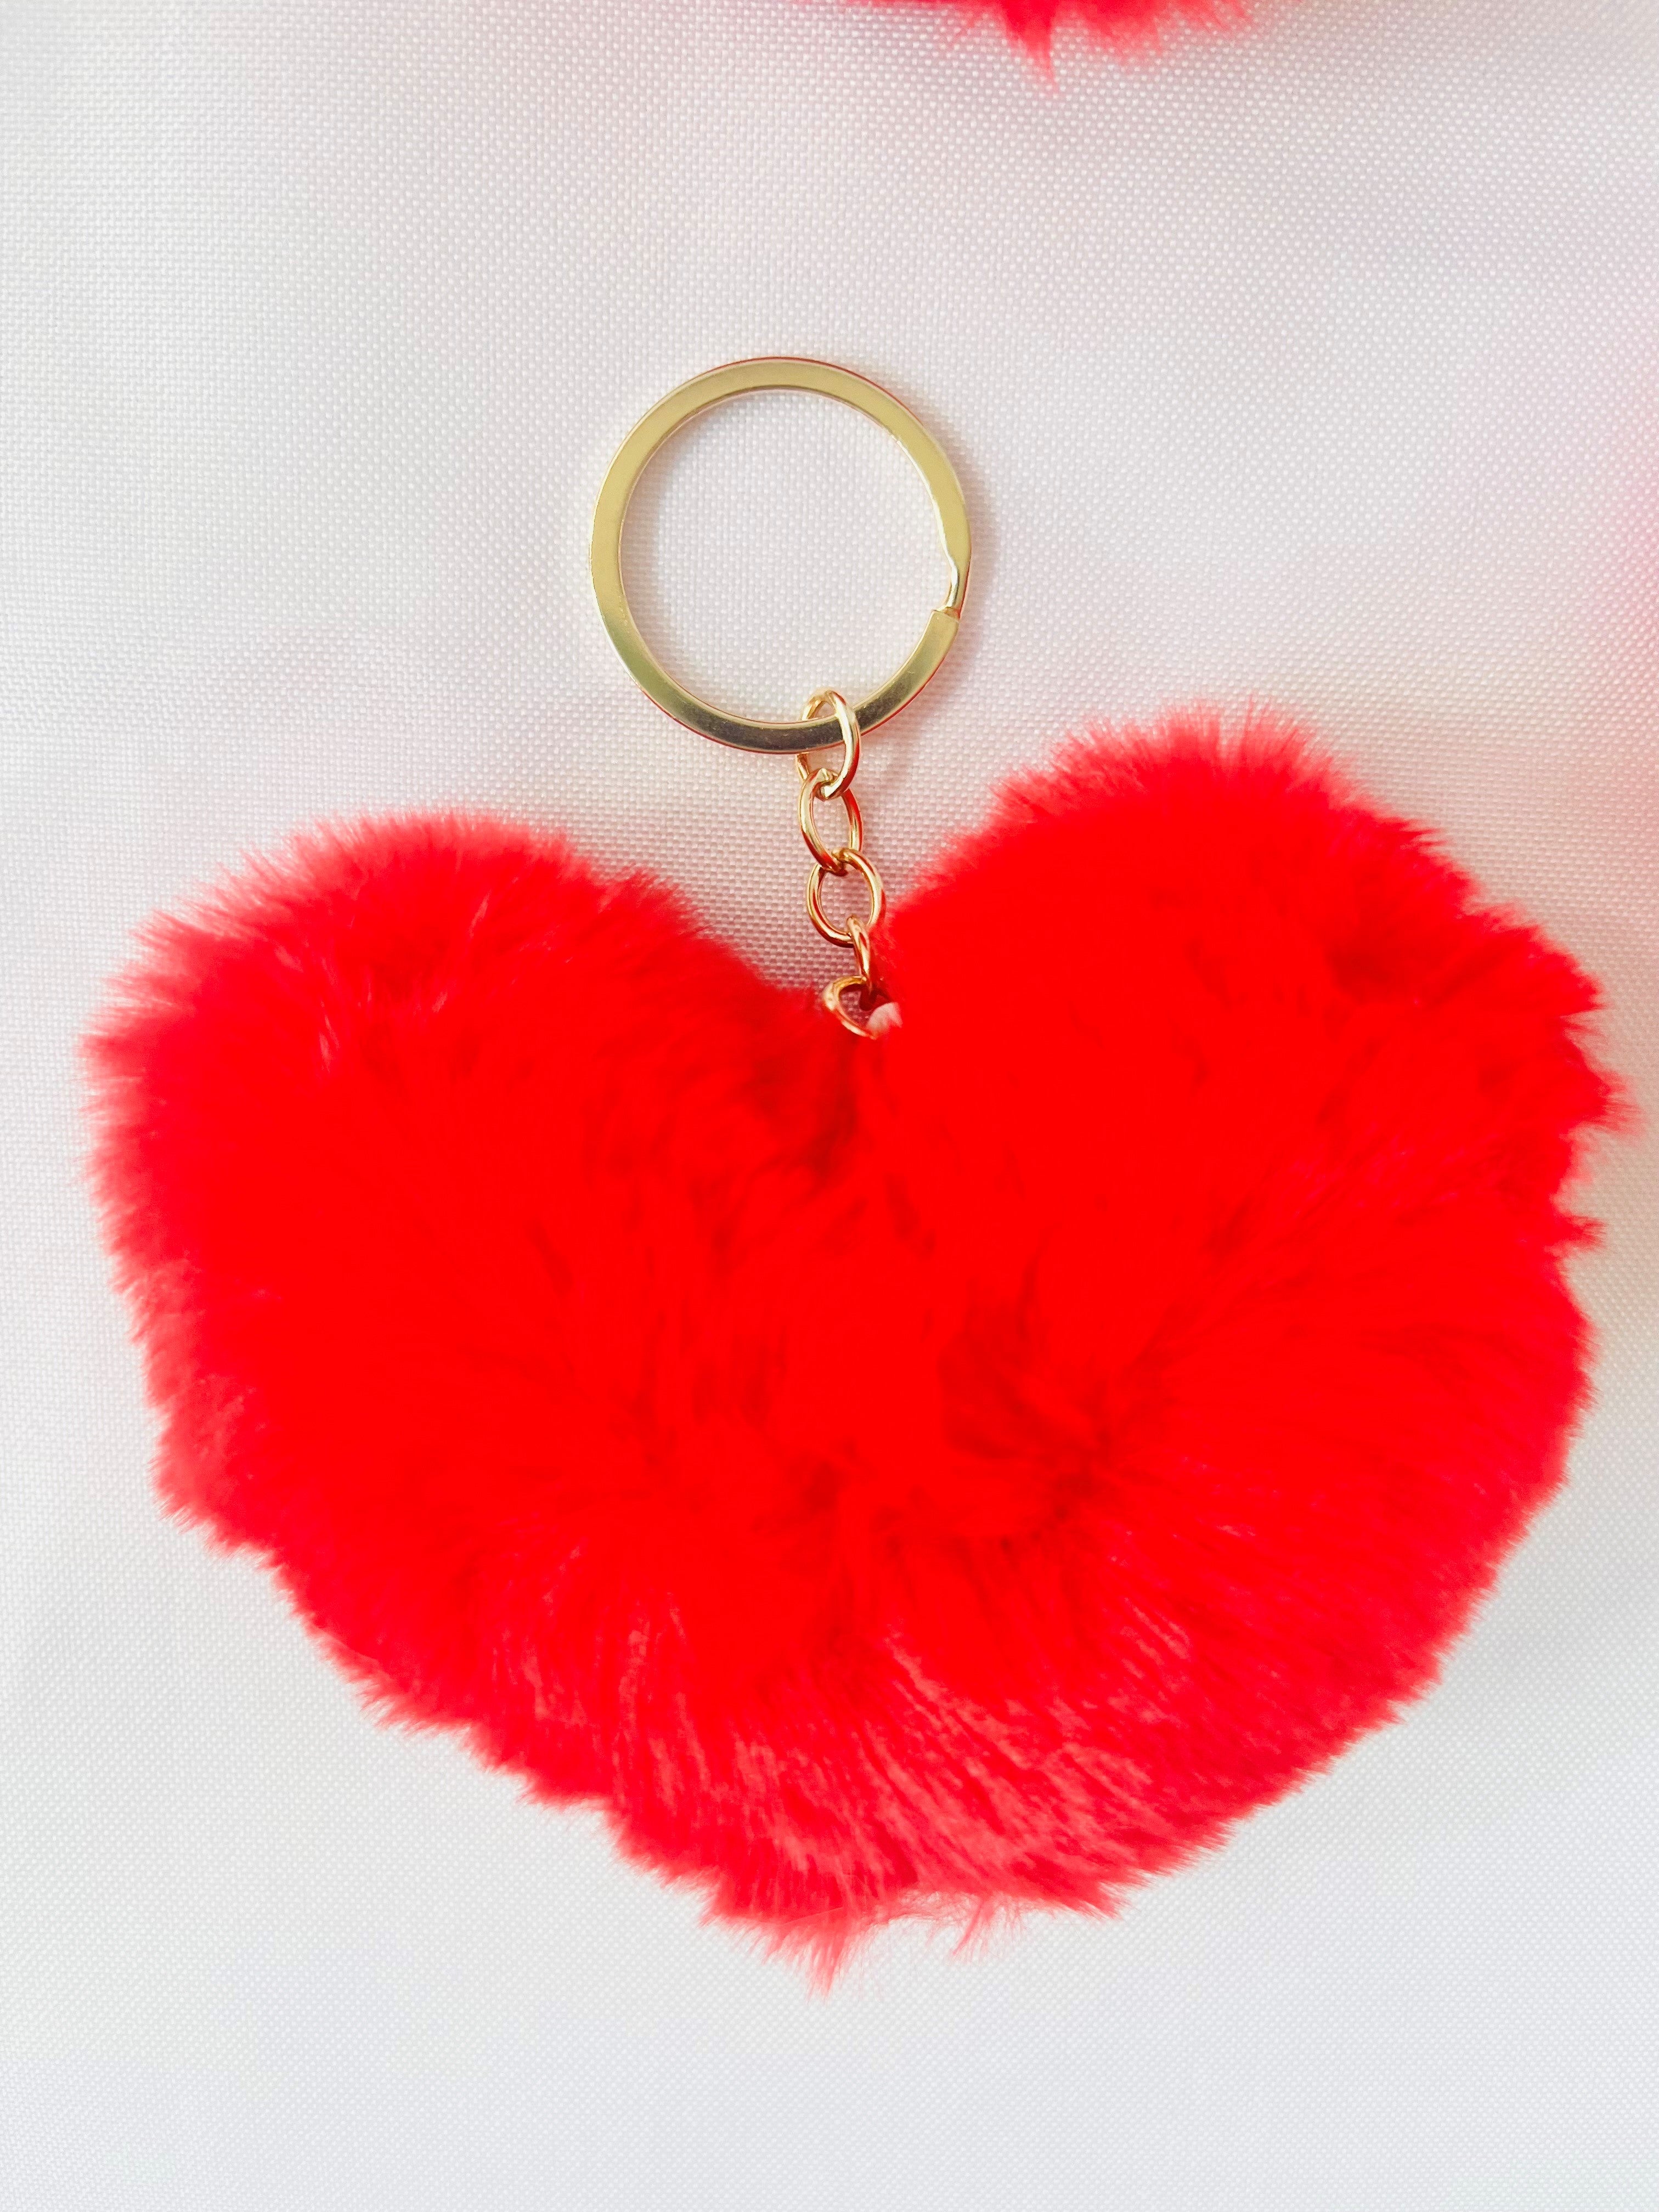 Fluffy Red Heart Keychain